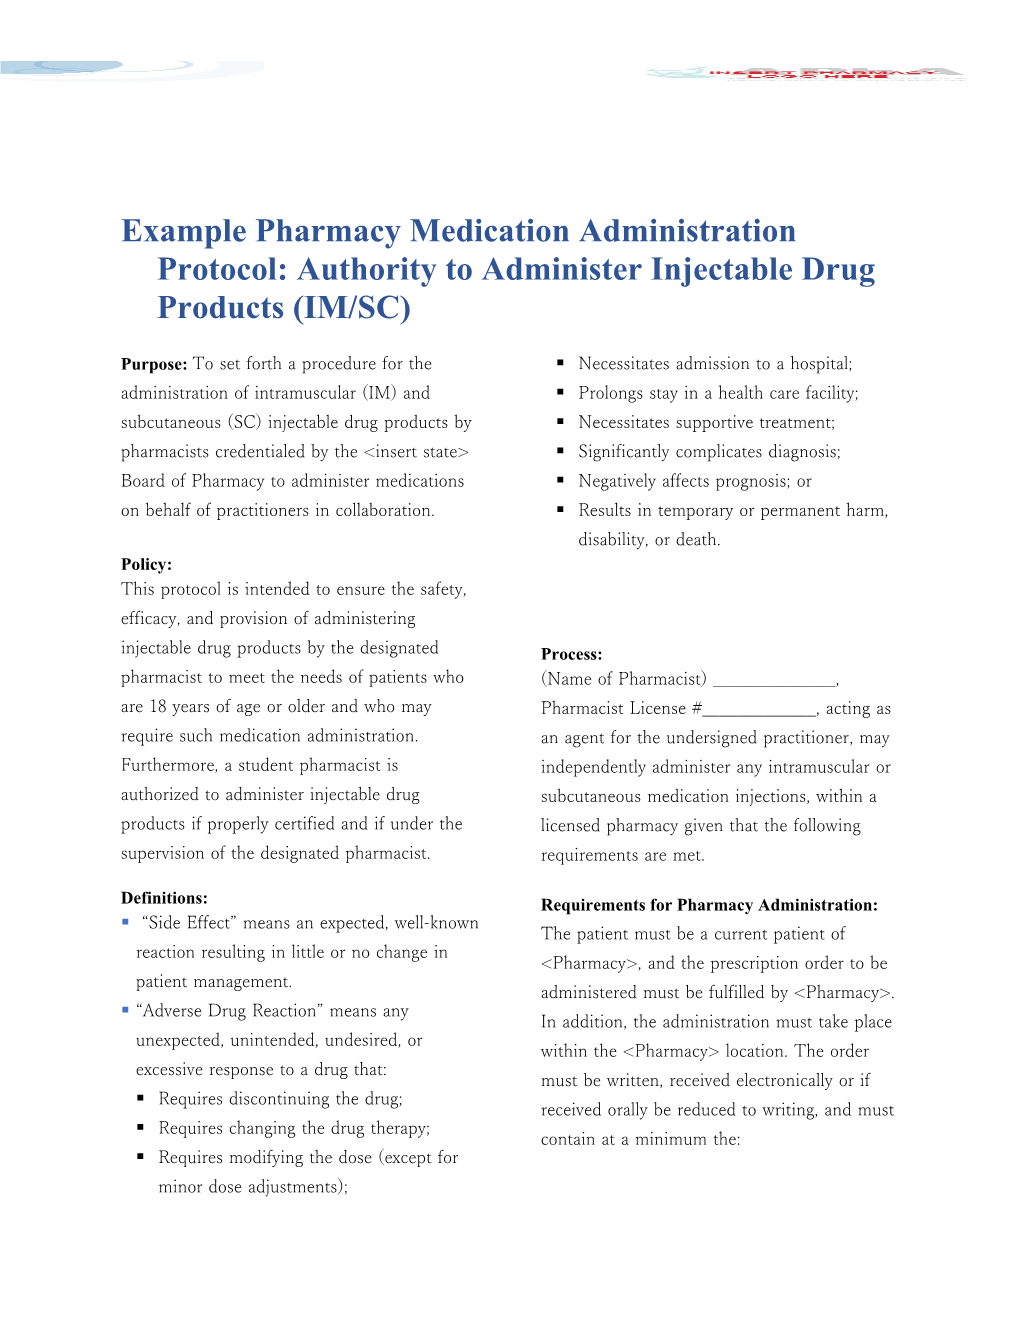 Example Pharmacy Medication Administration Protocol: Authority to Administer Injectable